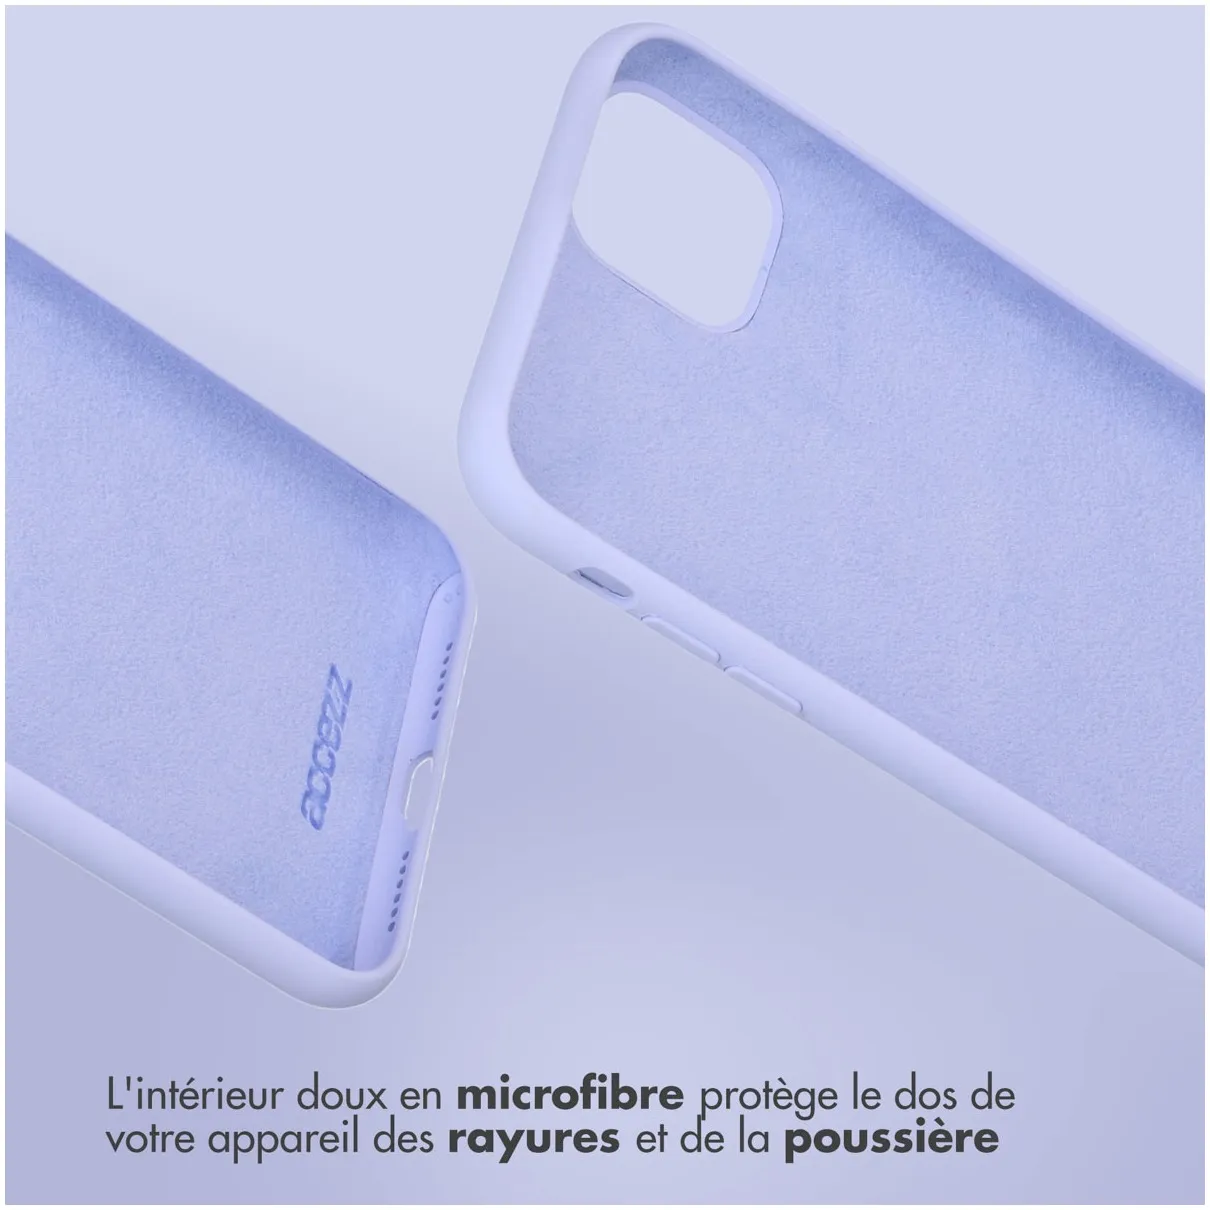 Accezz Liquid Silicone Backcover iPhone 15 Pro Paars